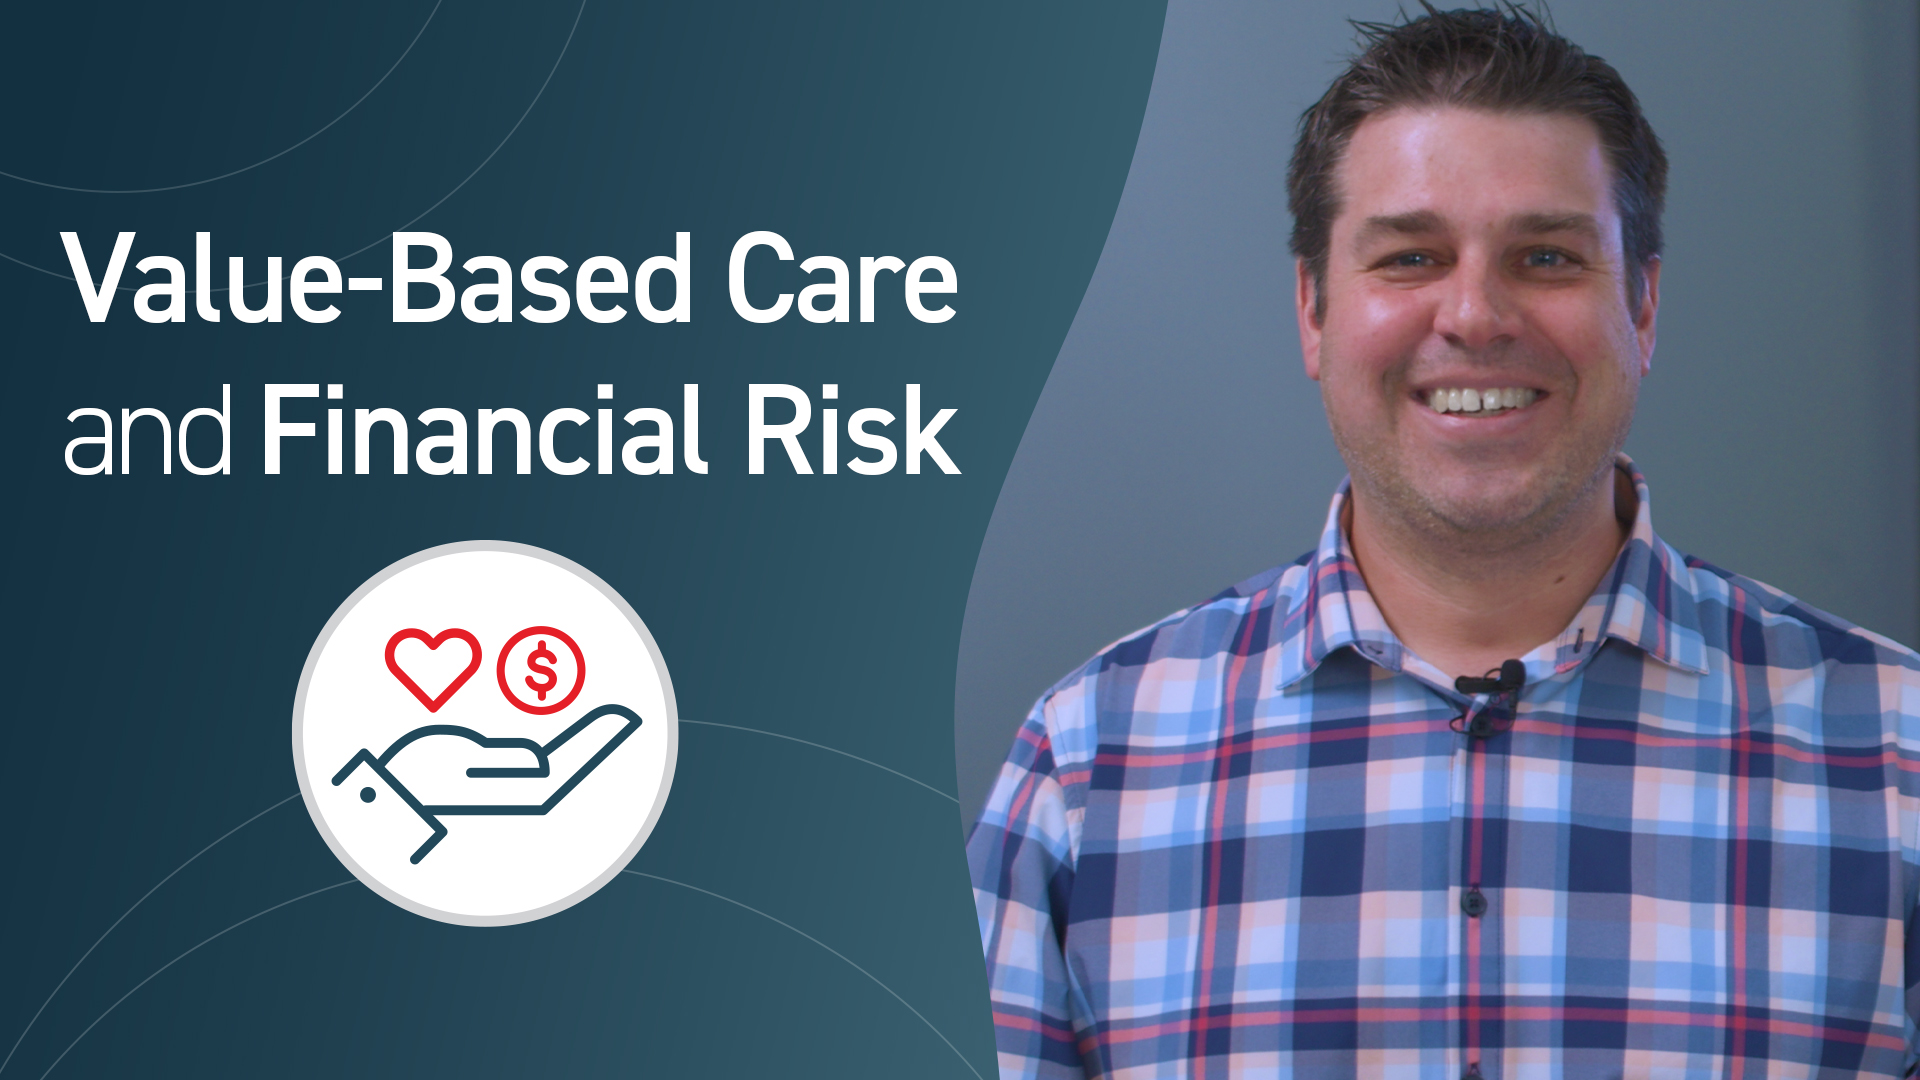 Value-Based Care and Financial Risk